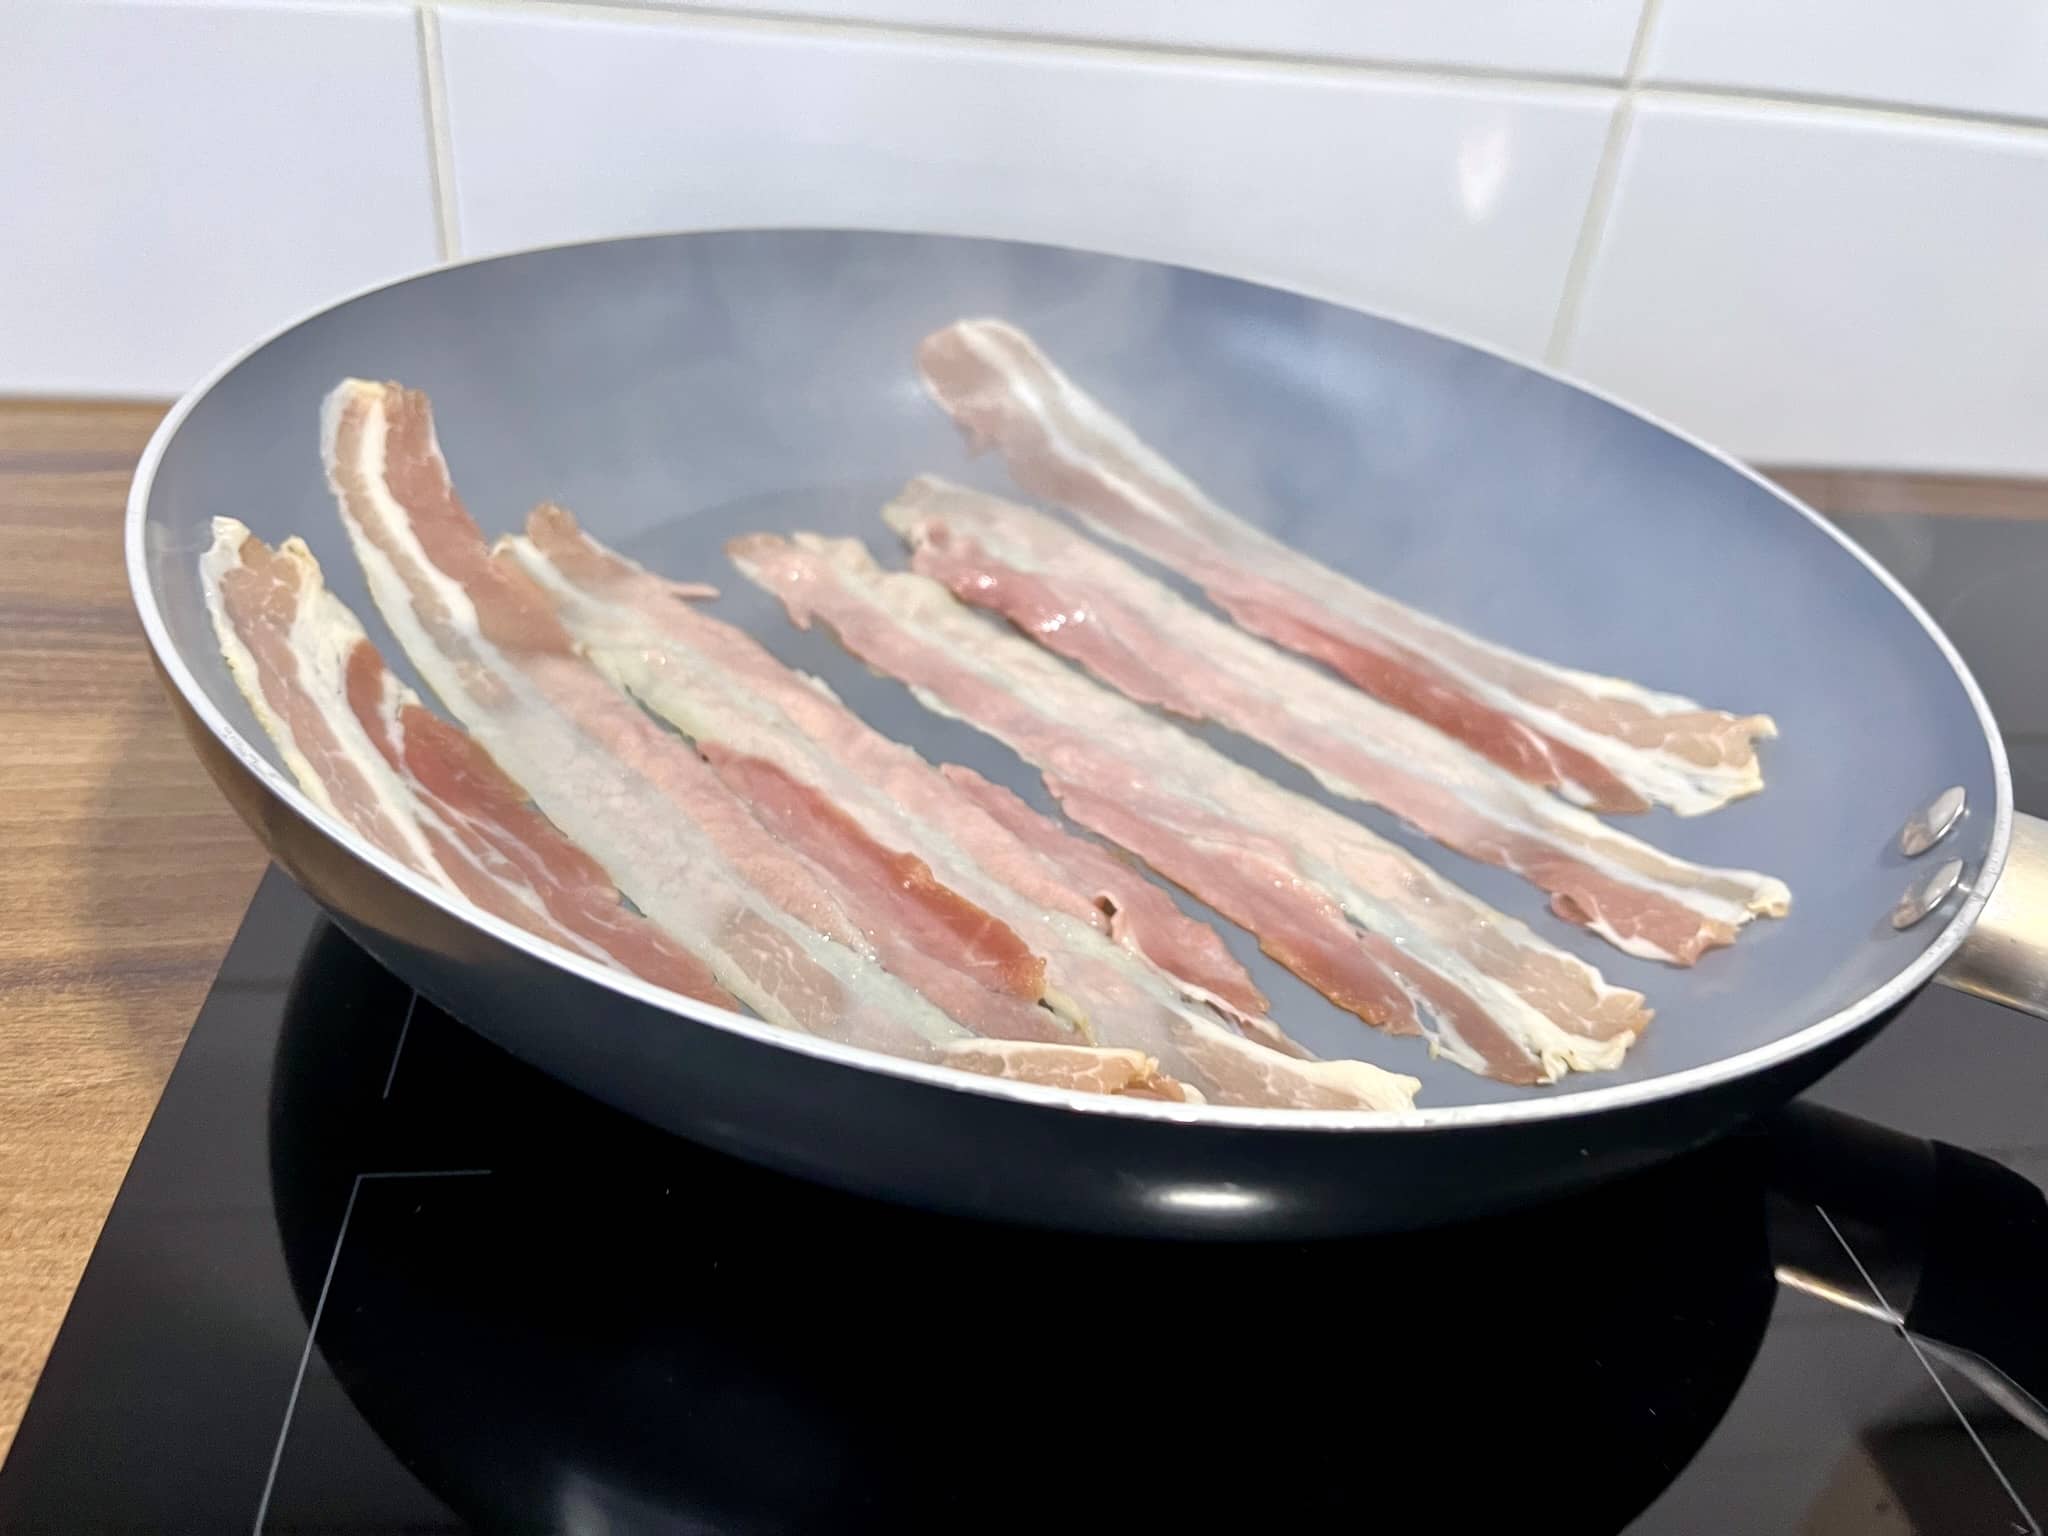 Smoked pancetta rashers are frying in a skillet